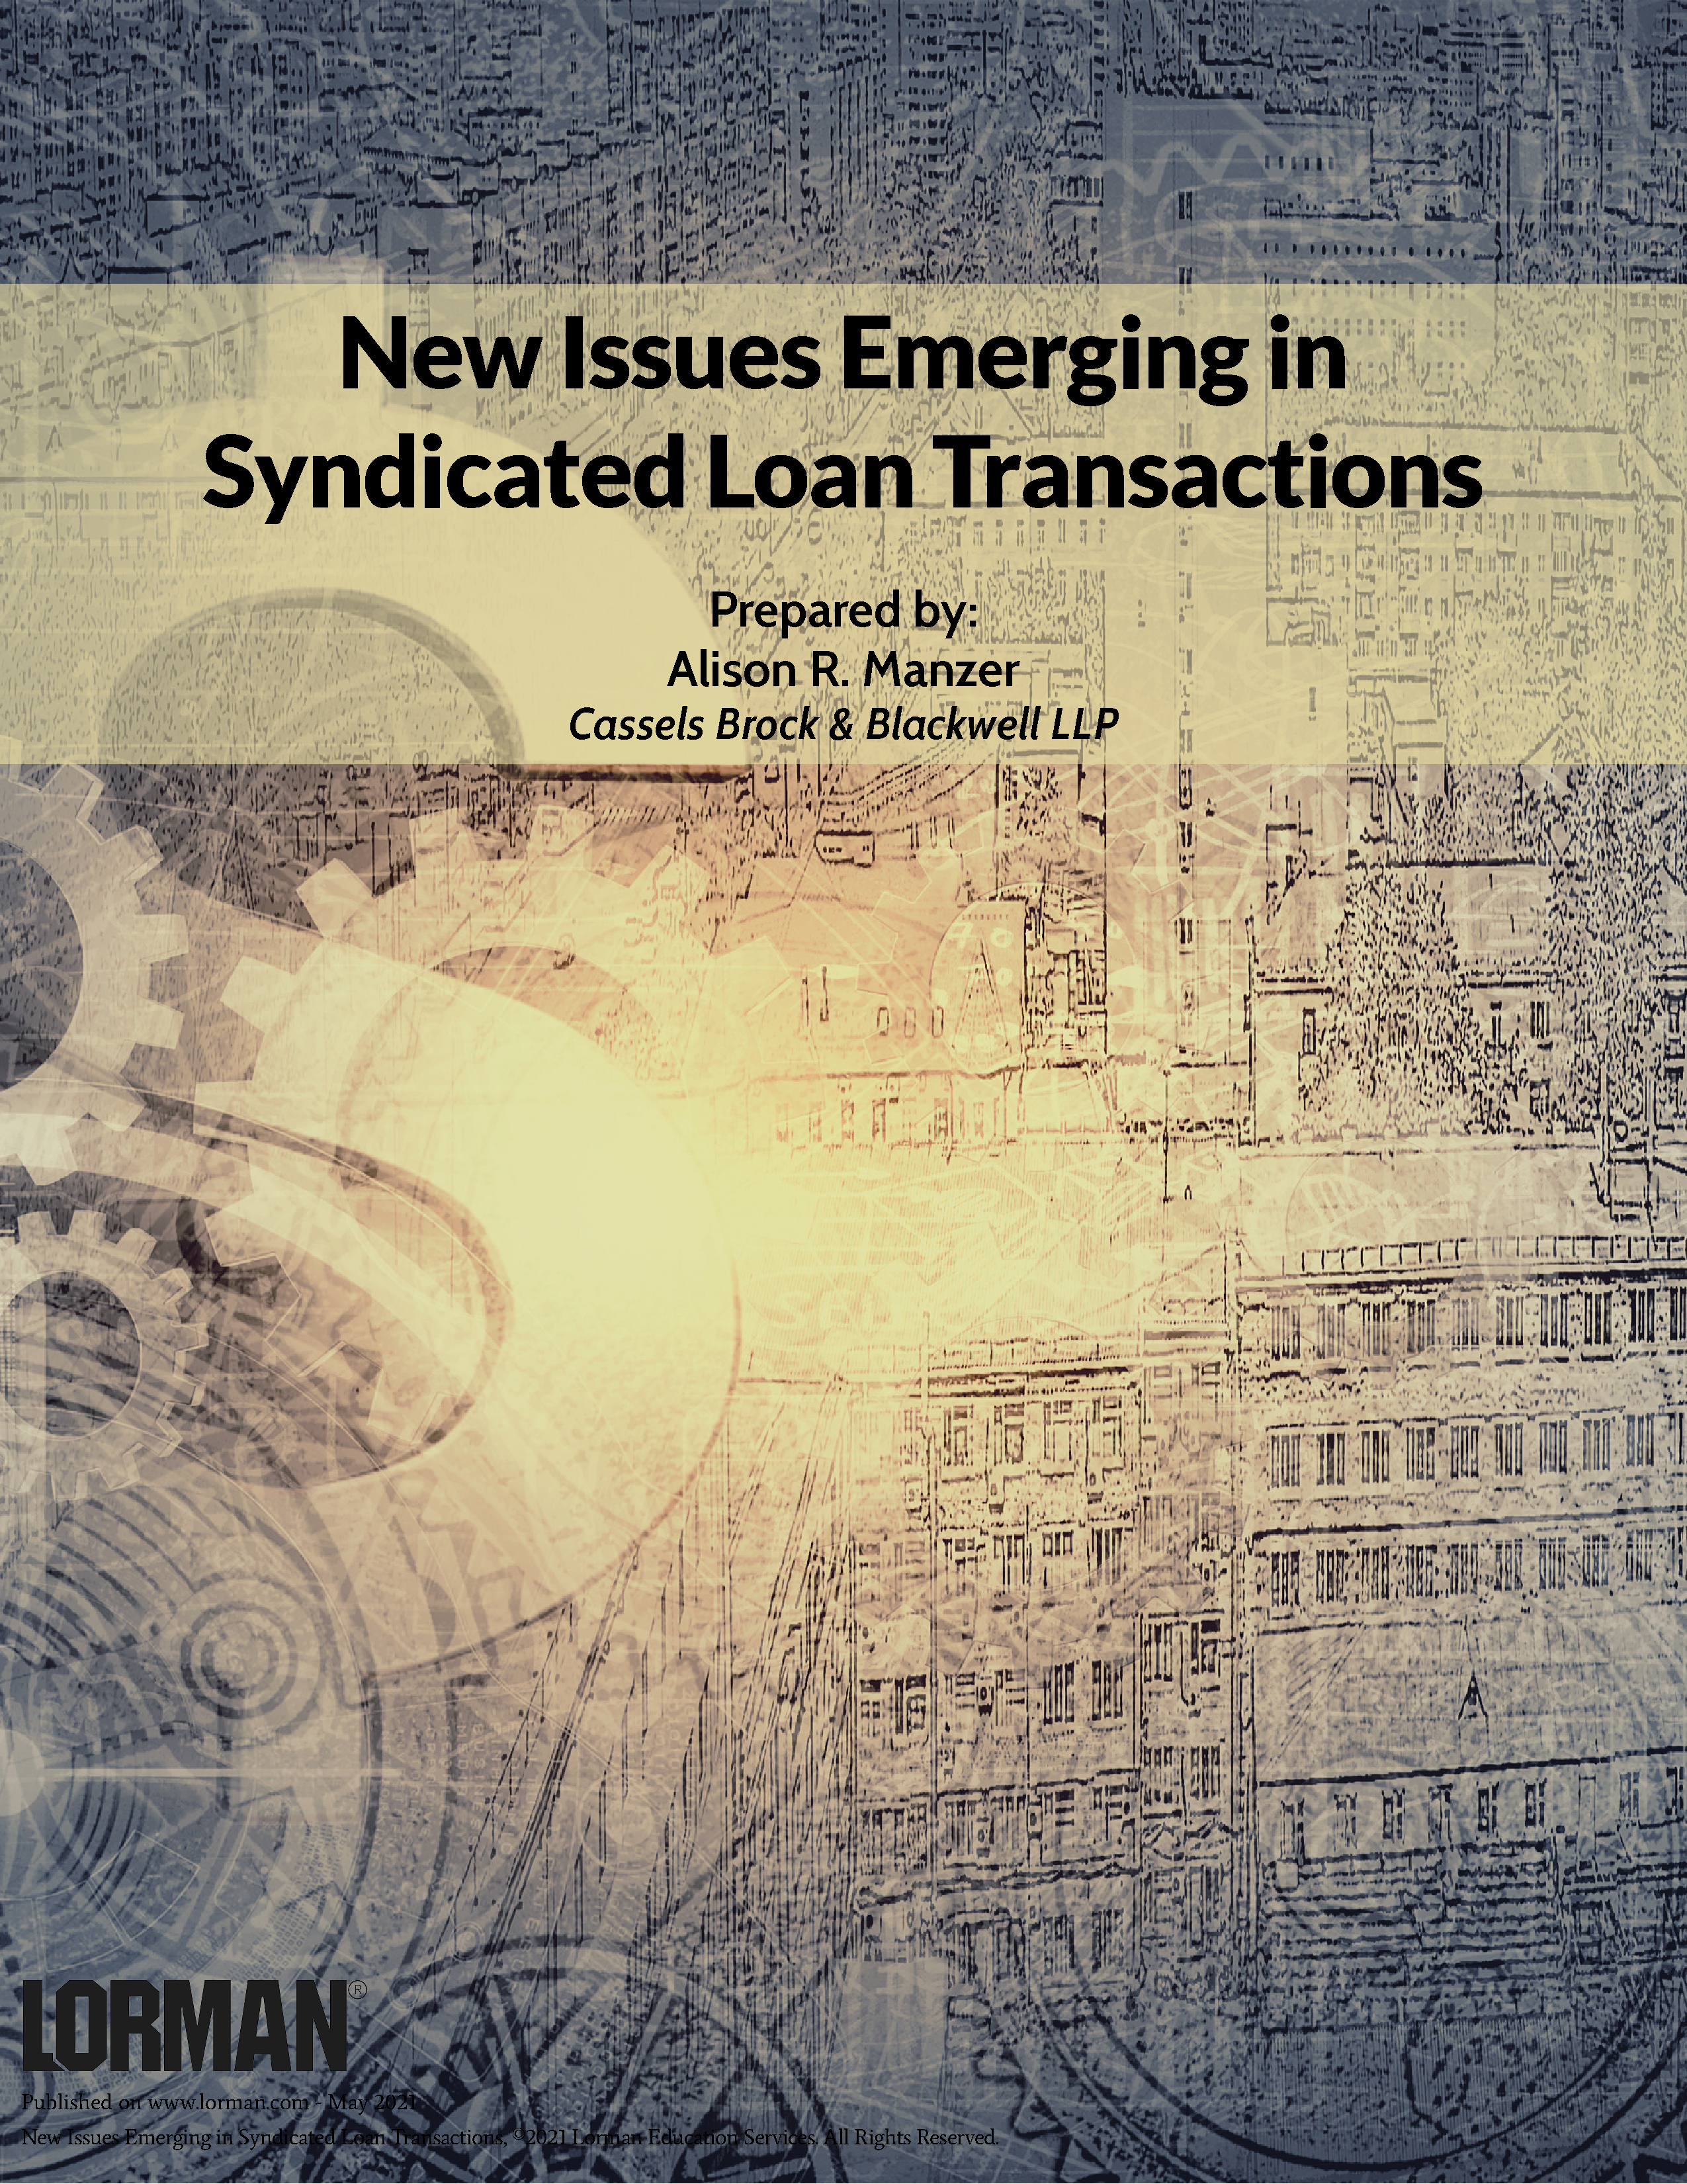 New Issues Emerging in Syndicated Loan Transactions